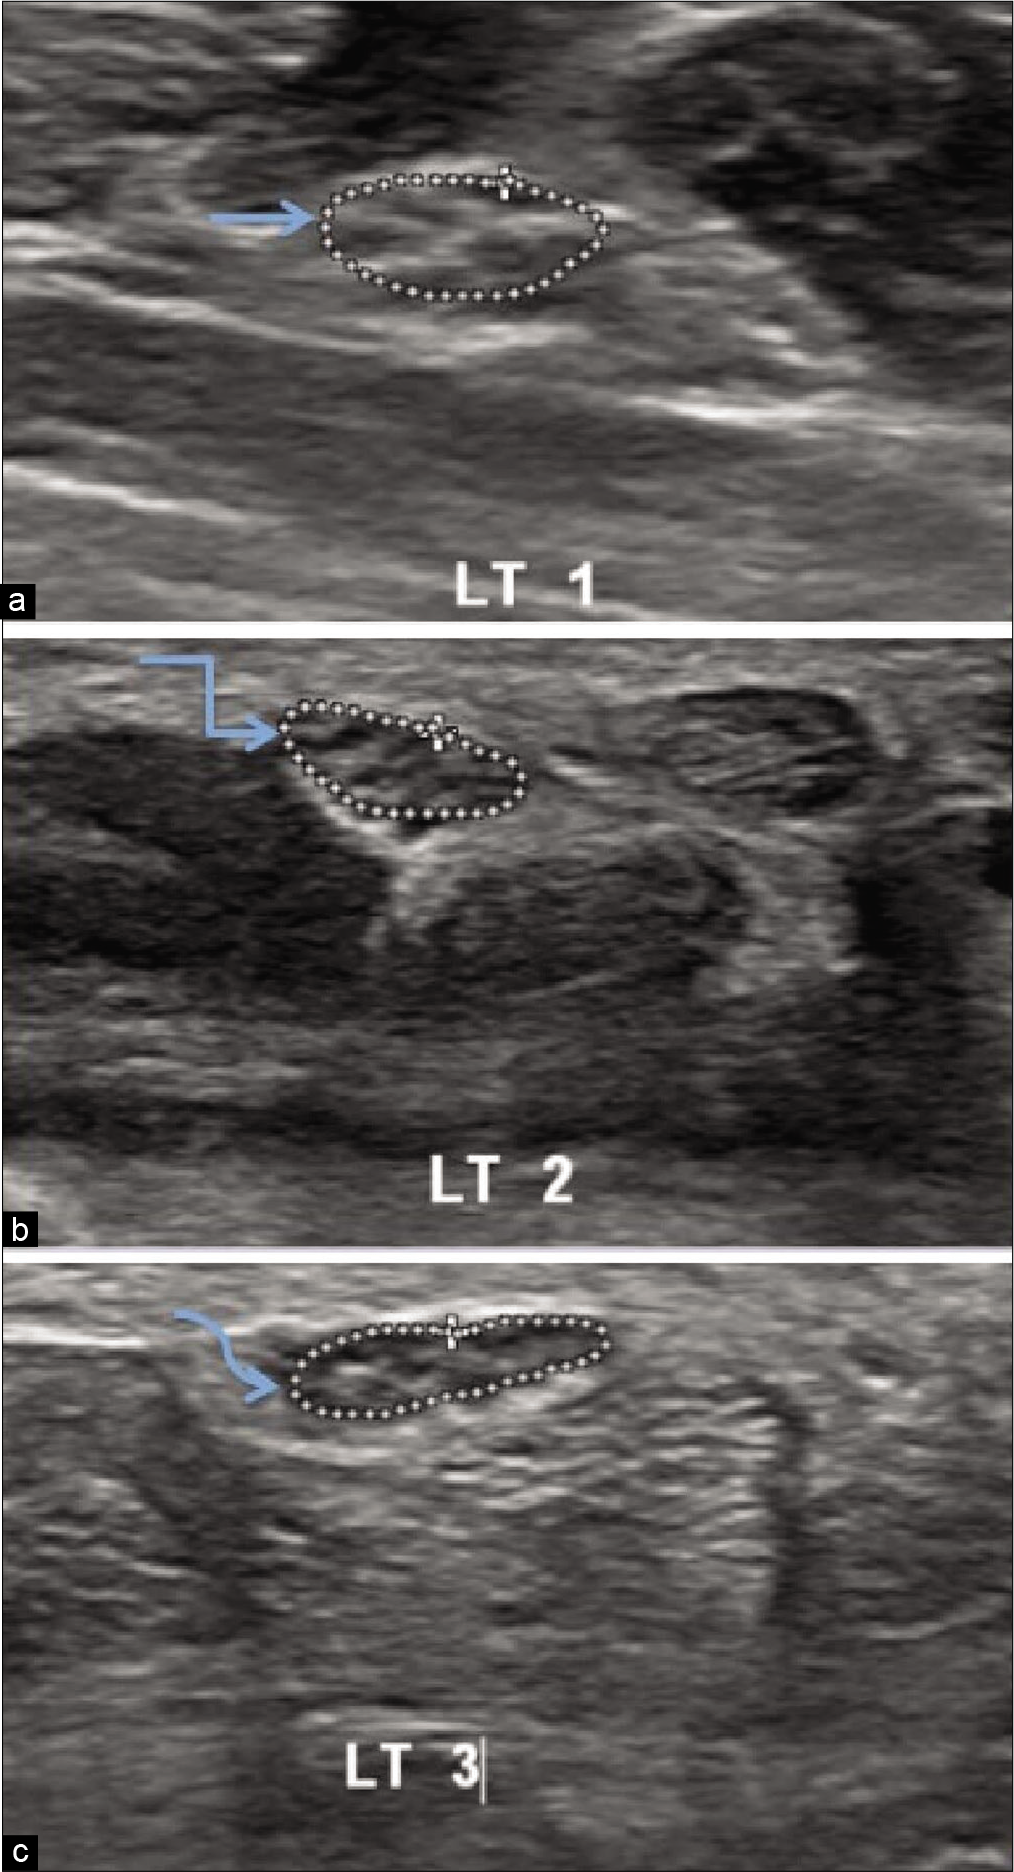 Ultrasonography image of the left median nerve of a healthy volunteer at three levels in distal forearm showing (a) cross sectional area 0.064 cm2 at the level of pronator quadratus.(straight arrow) (b) cross sectional area 0.067 cm2 proximal to the carpal tunnel inlet.(bent arrow) (c) cross sectional area 0.069 cm2 distal to the carpal tunnel outlet.(curved arrow).